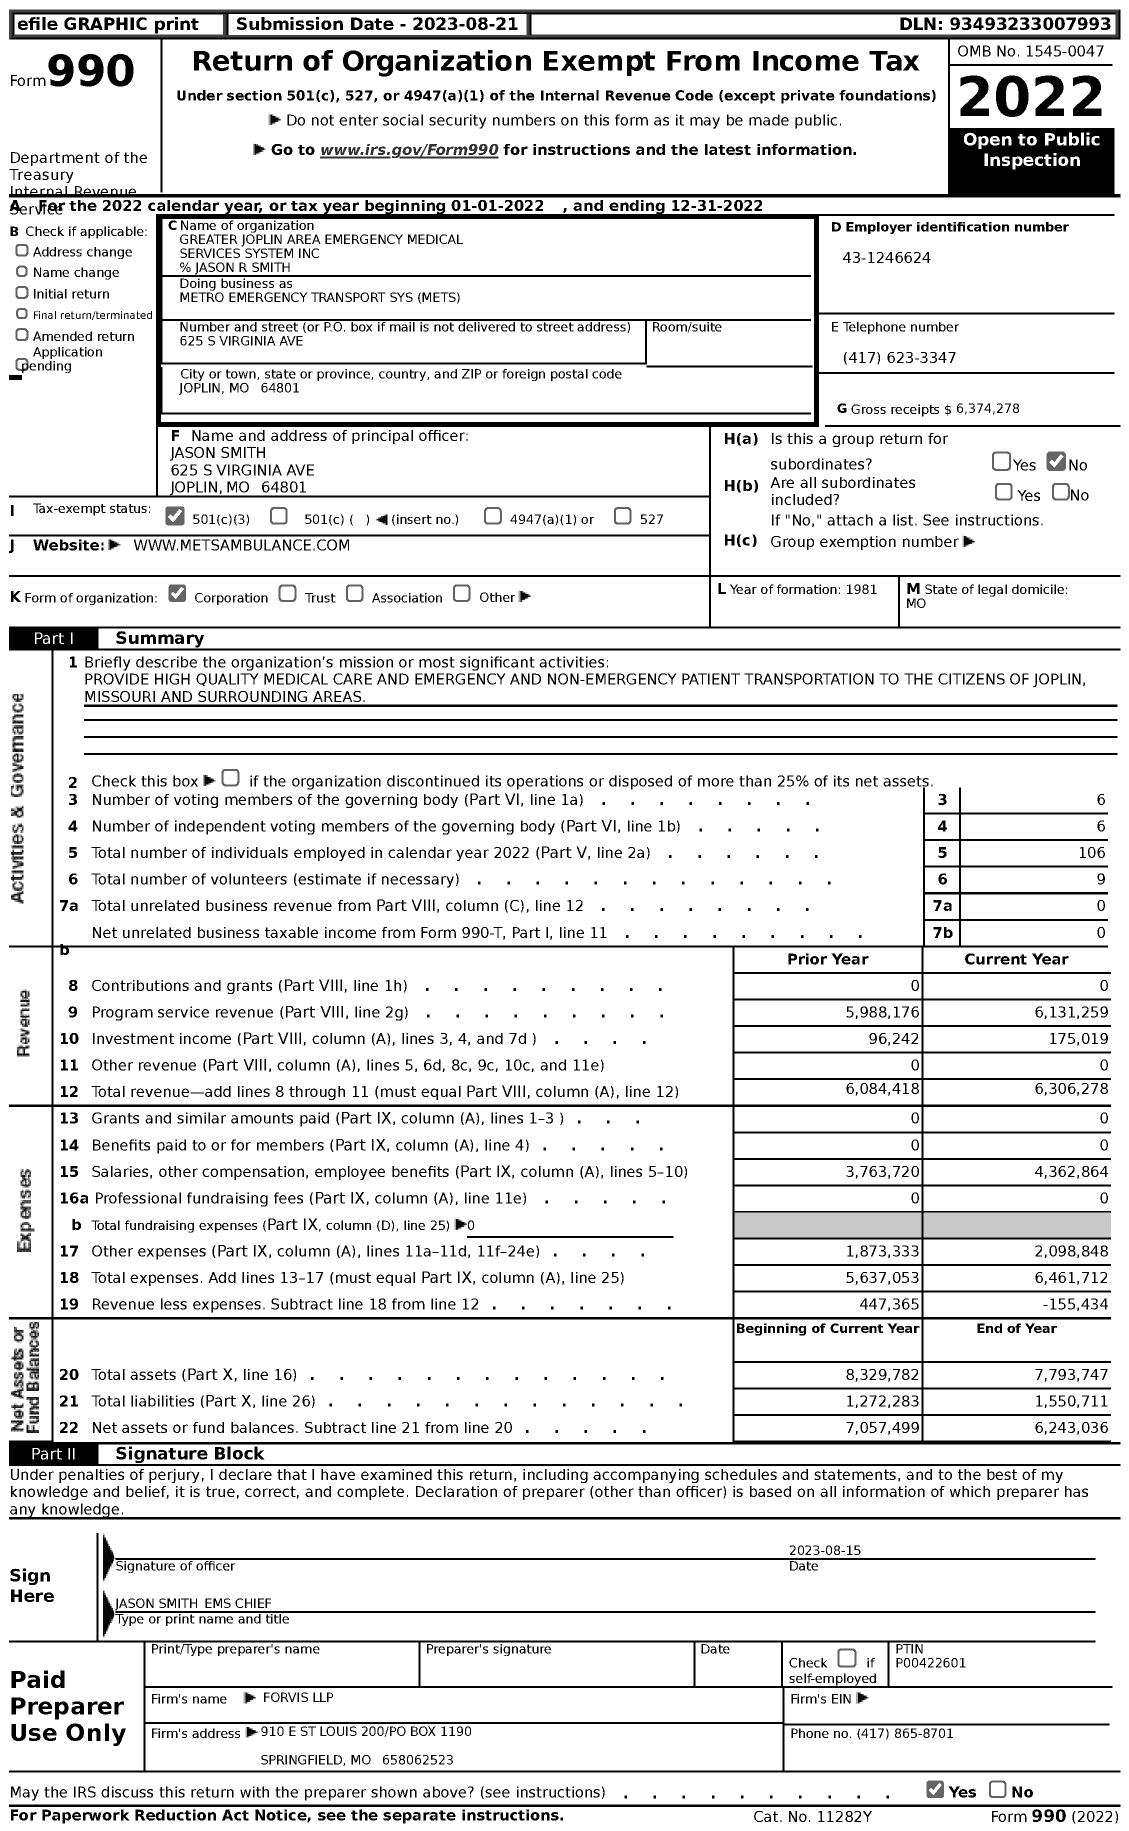 Image of first page of 2022 Form 990 for Metro Emergency Transport System (METS)